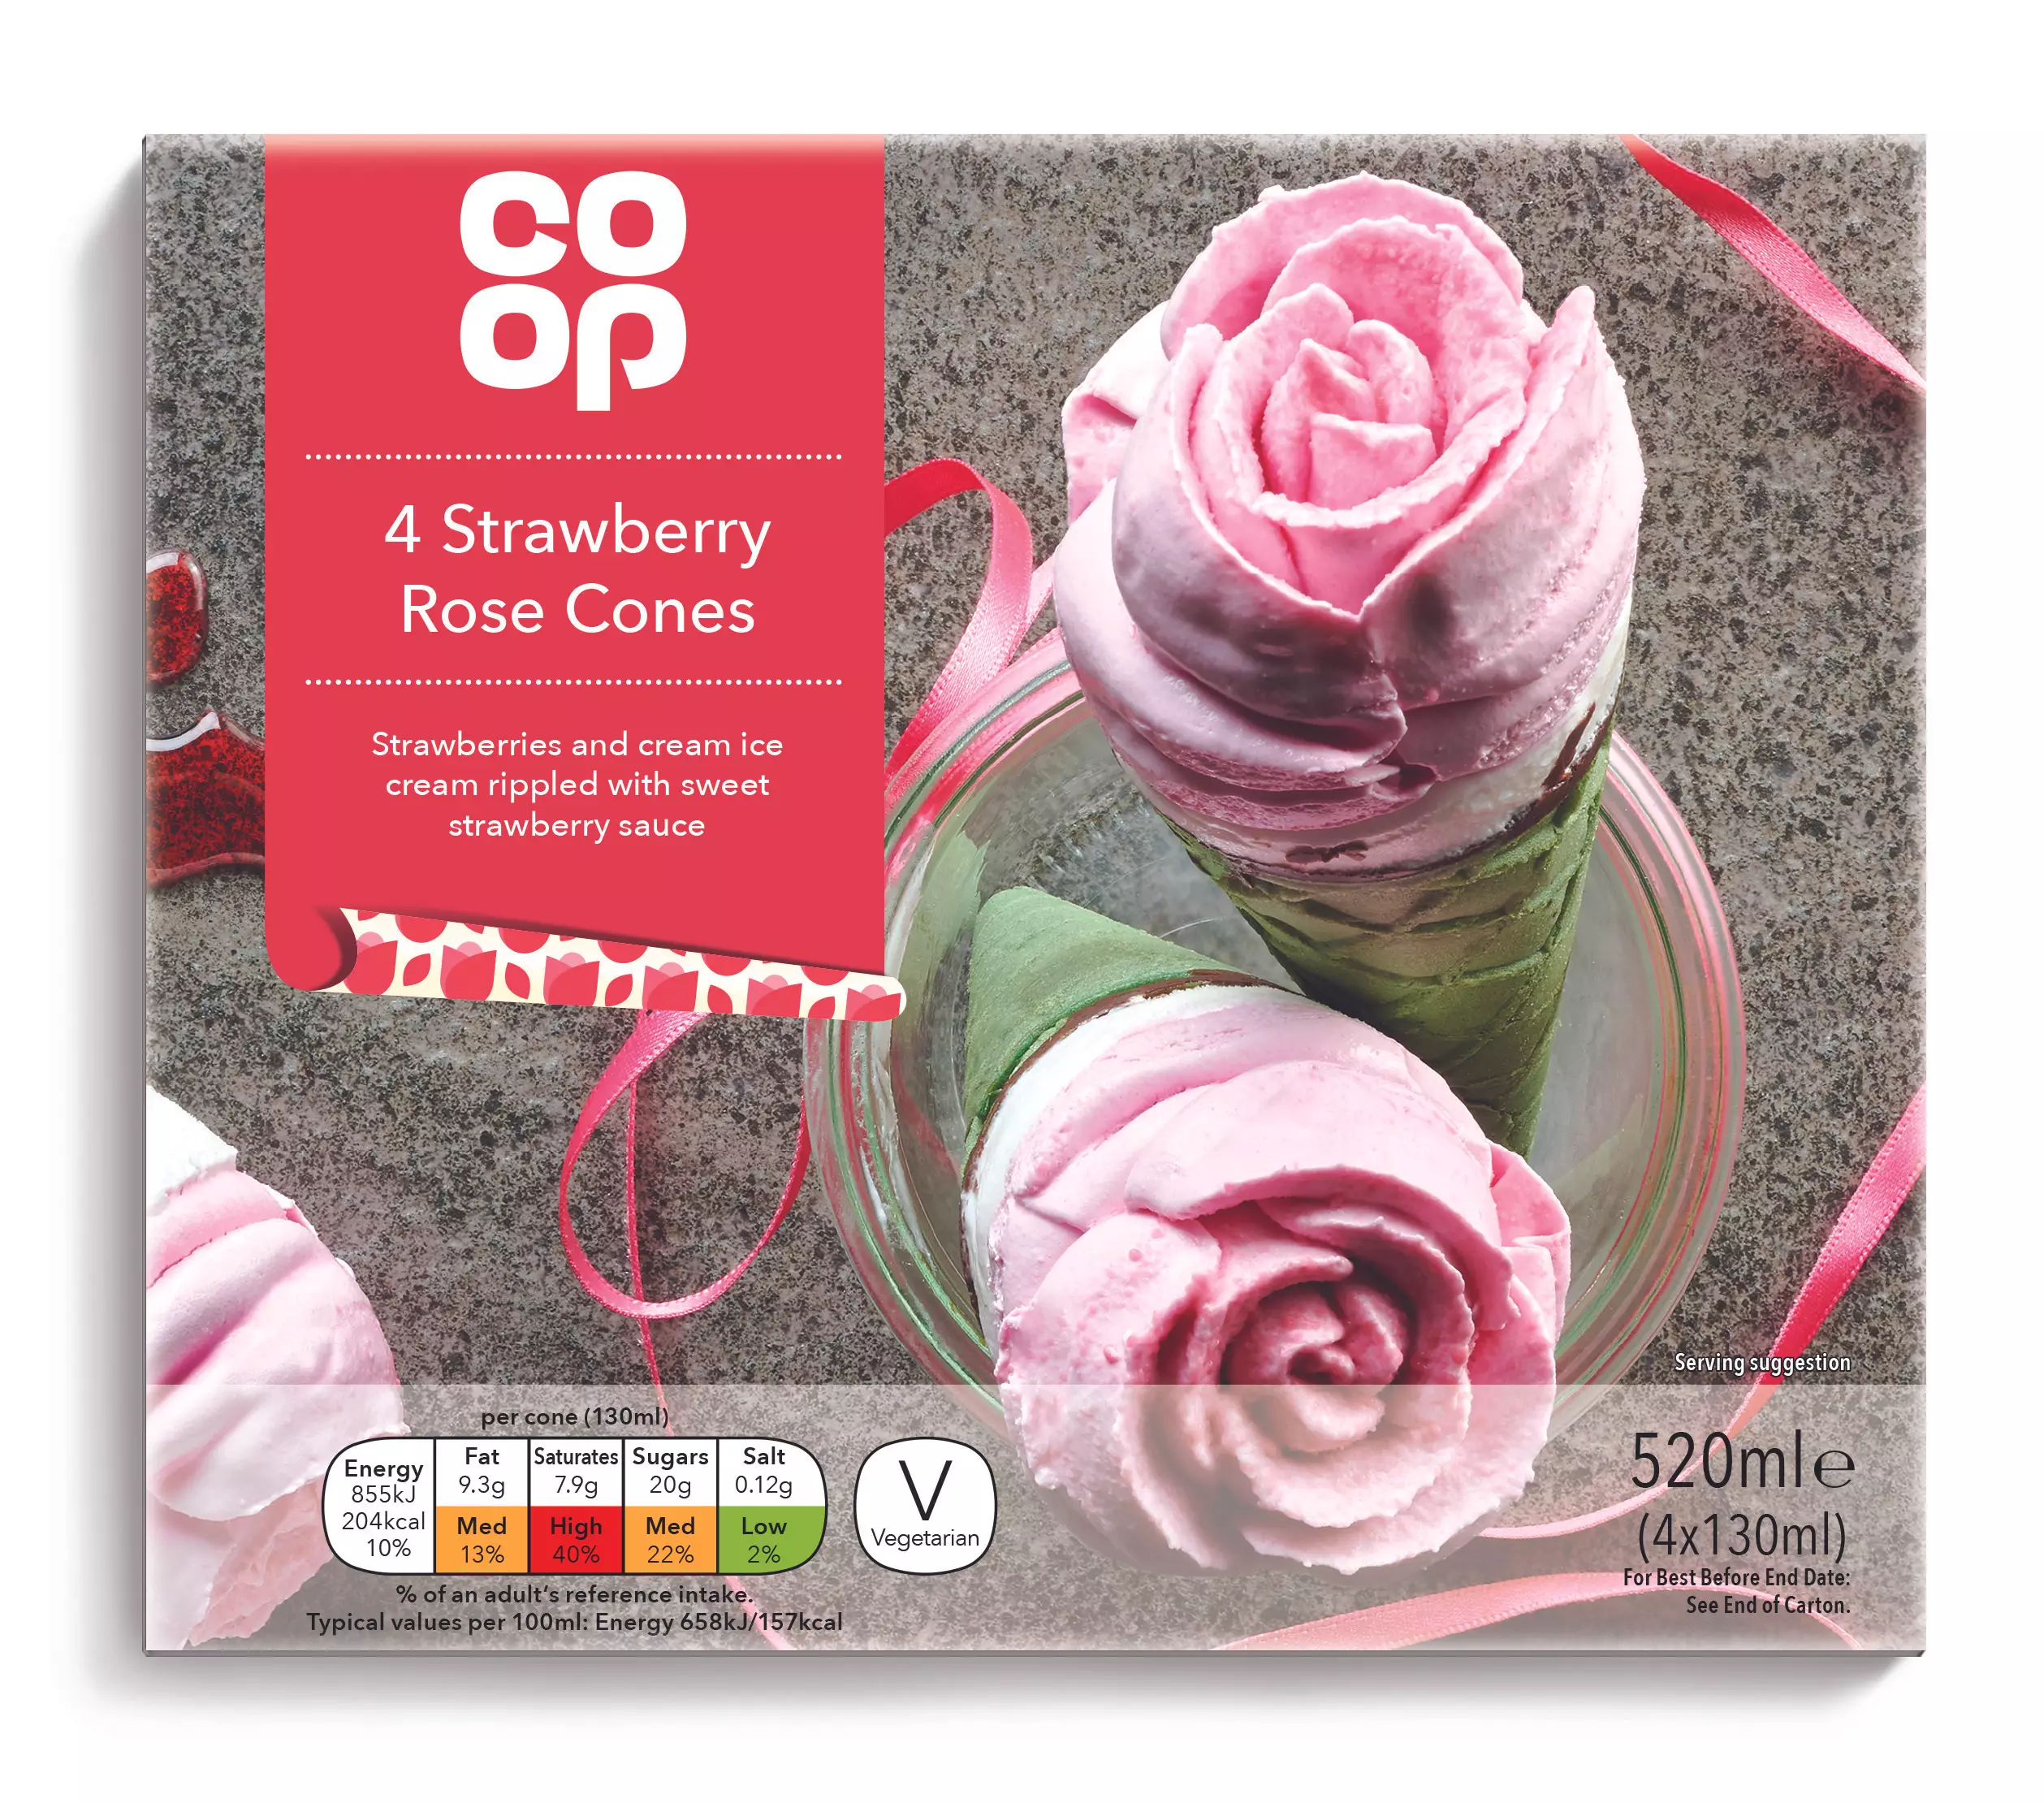 Priced at £2, the rose cones arrive in Co-op stores from Saturday 1st February (